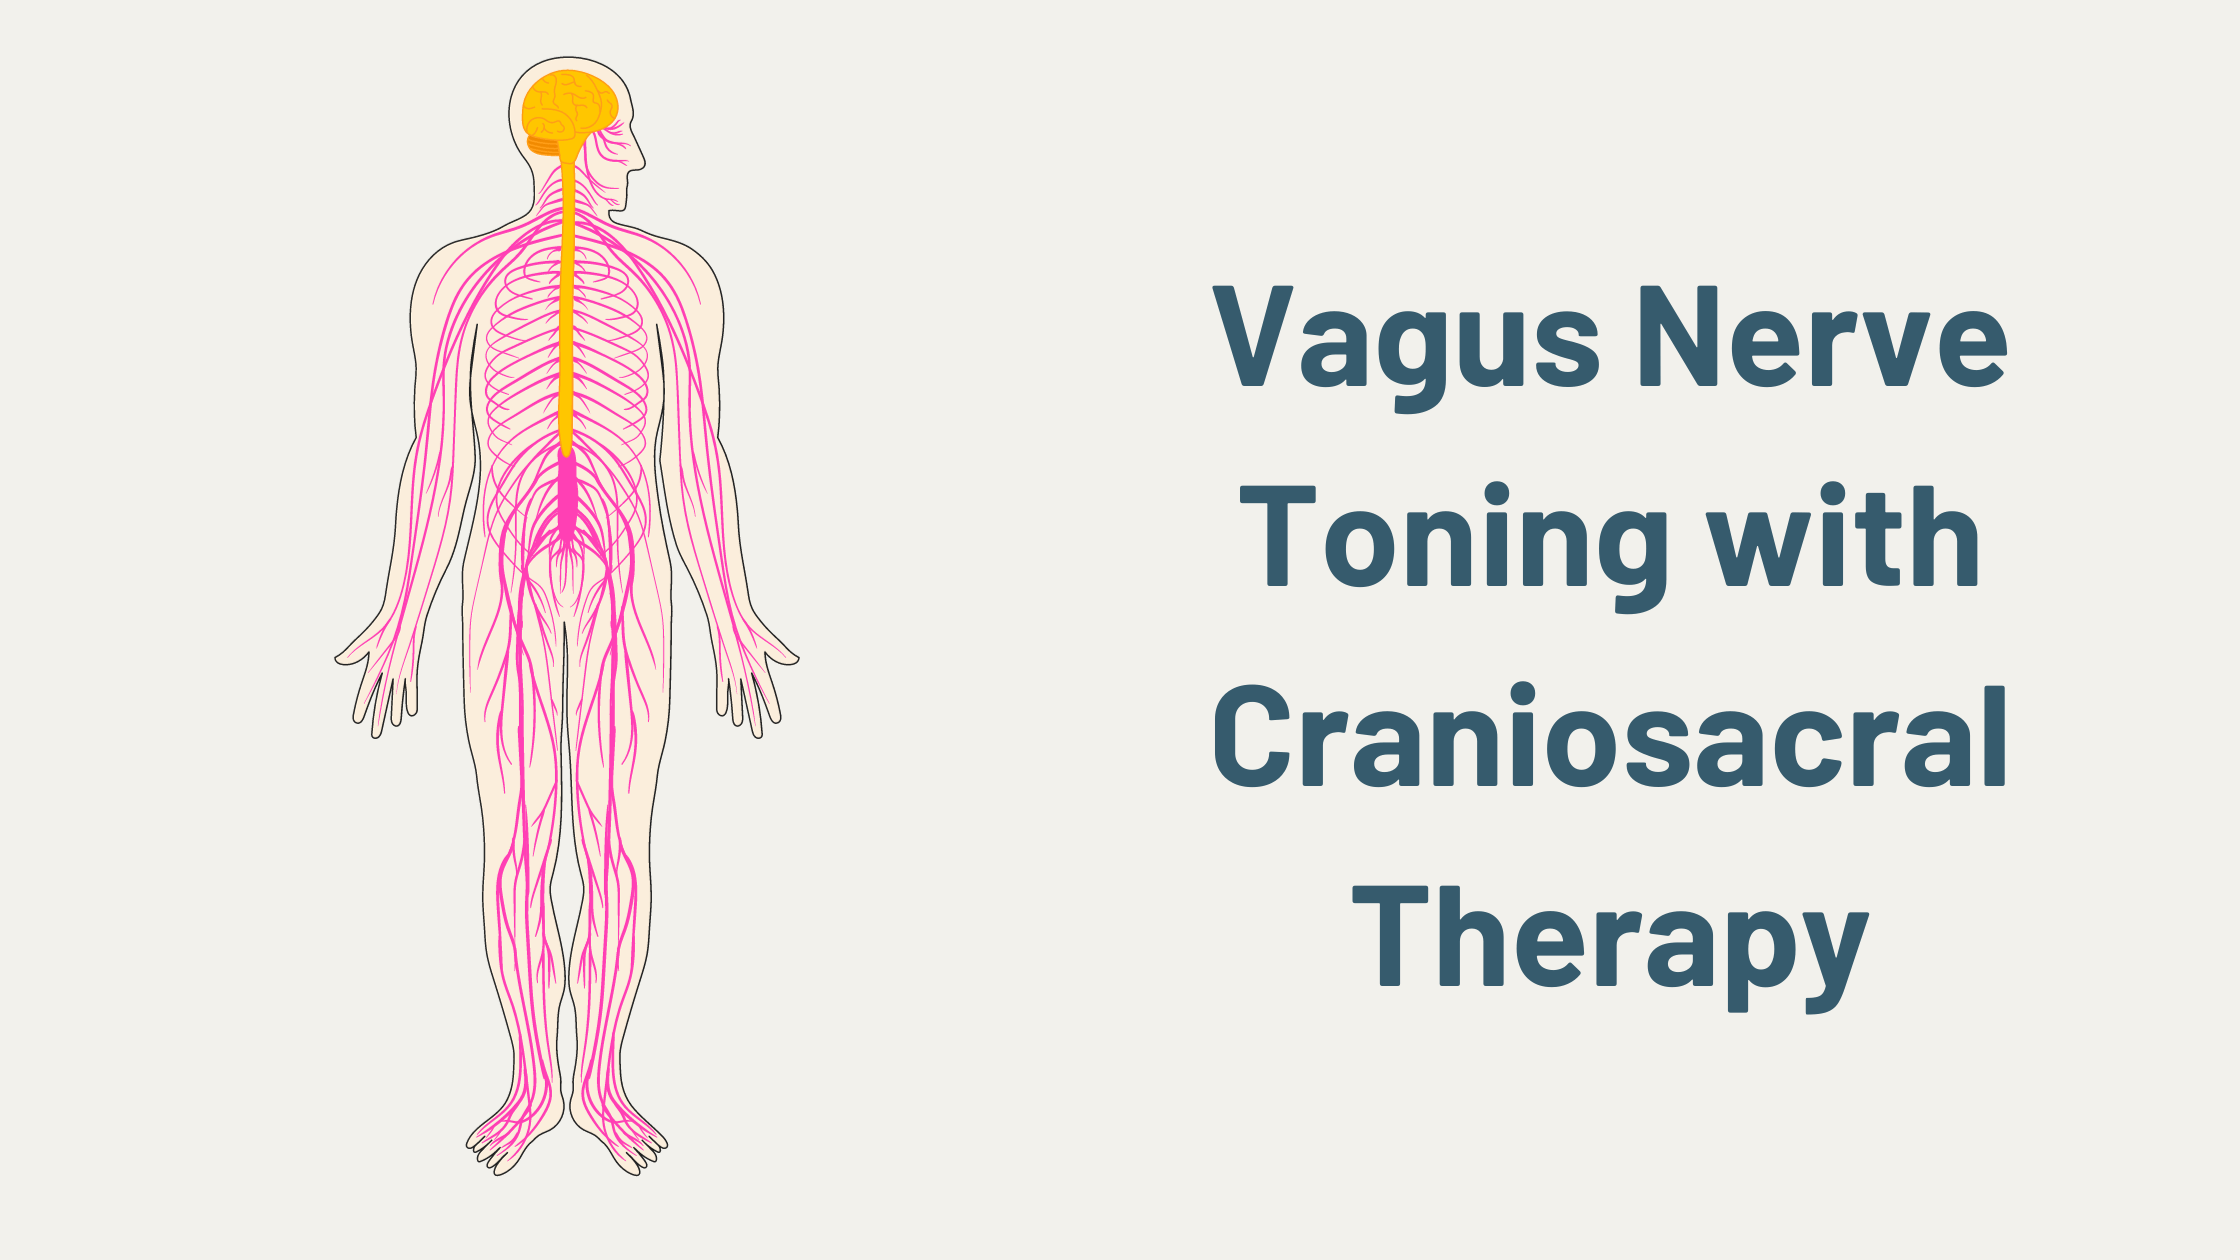 Vagus Nerve Toning with Craniosacral Therapy